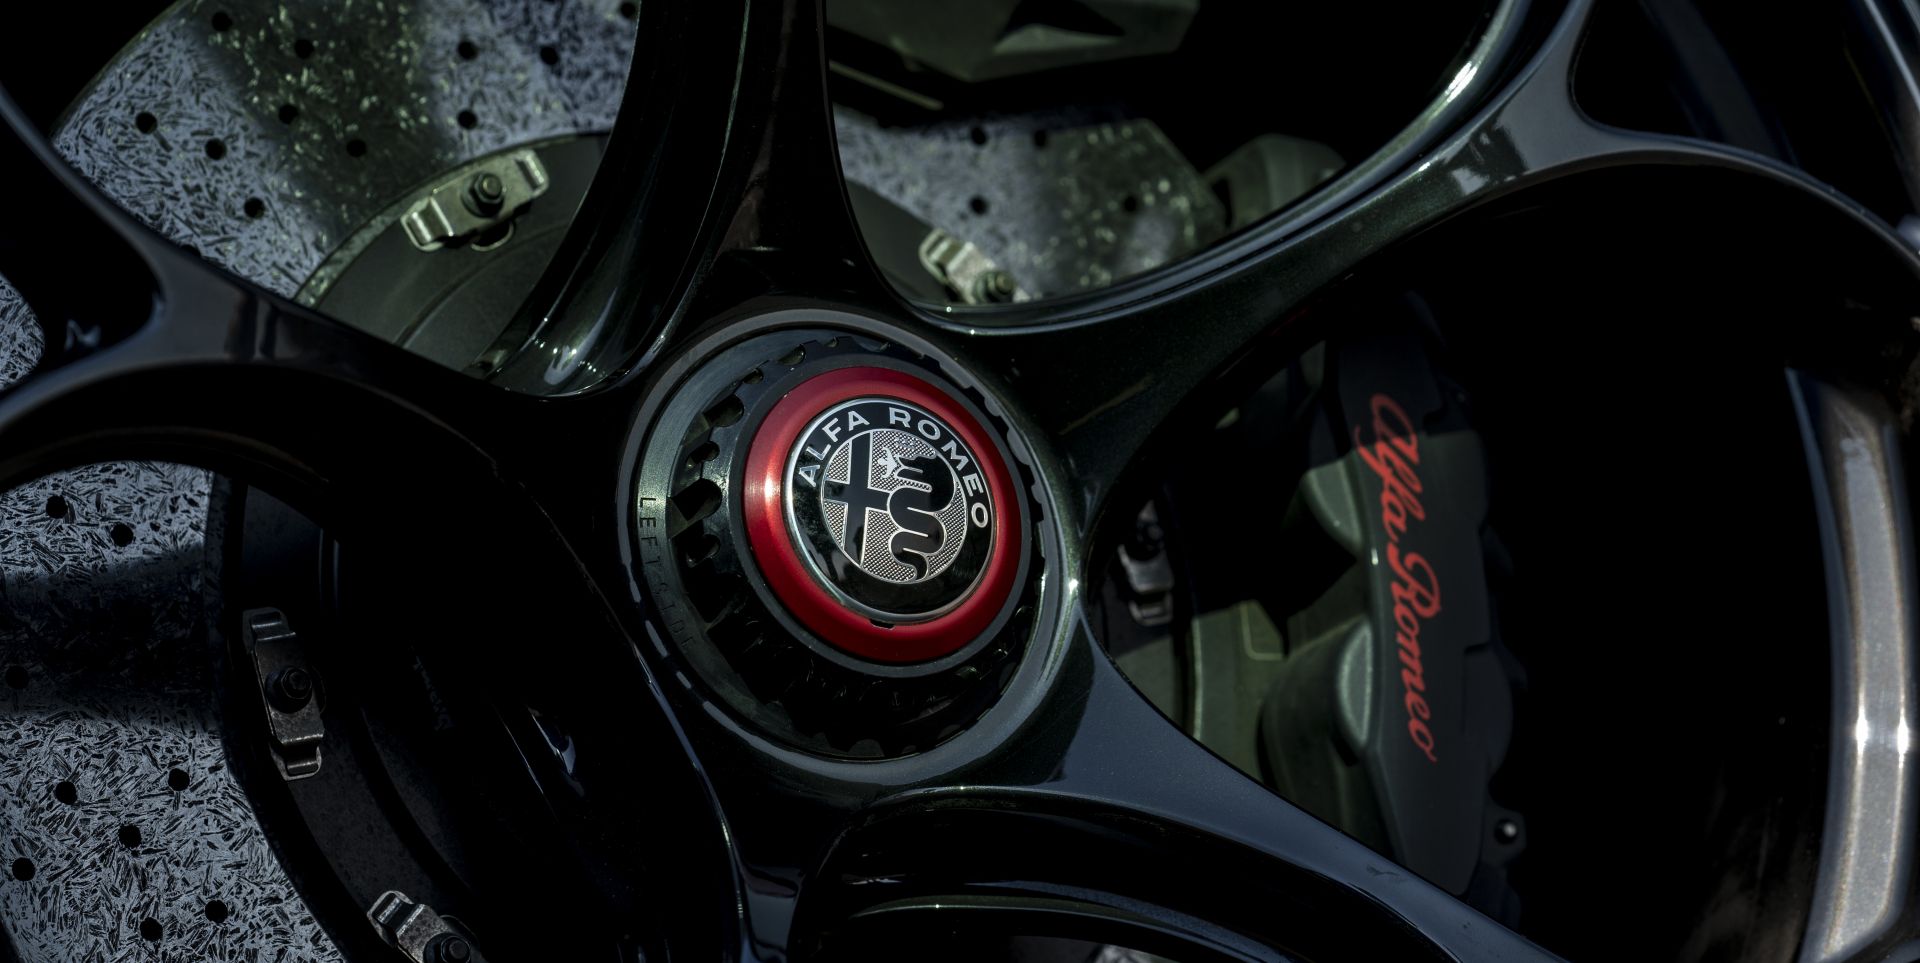 Alfa Romeo's Next Supercar Could Be Named 6C and Have the Giulia's 540-HP V-6